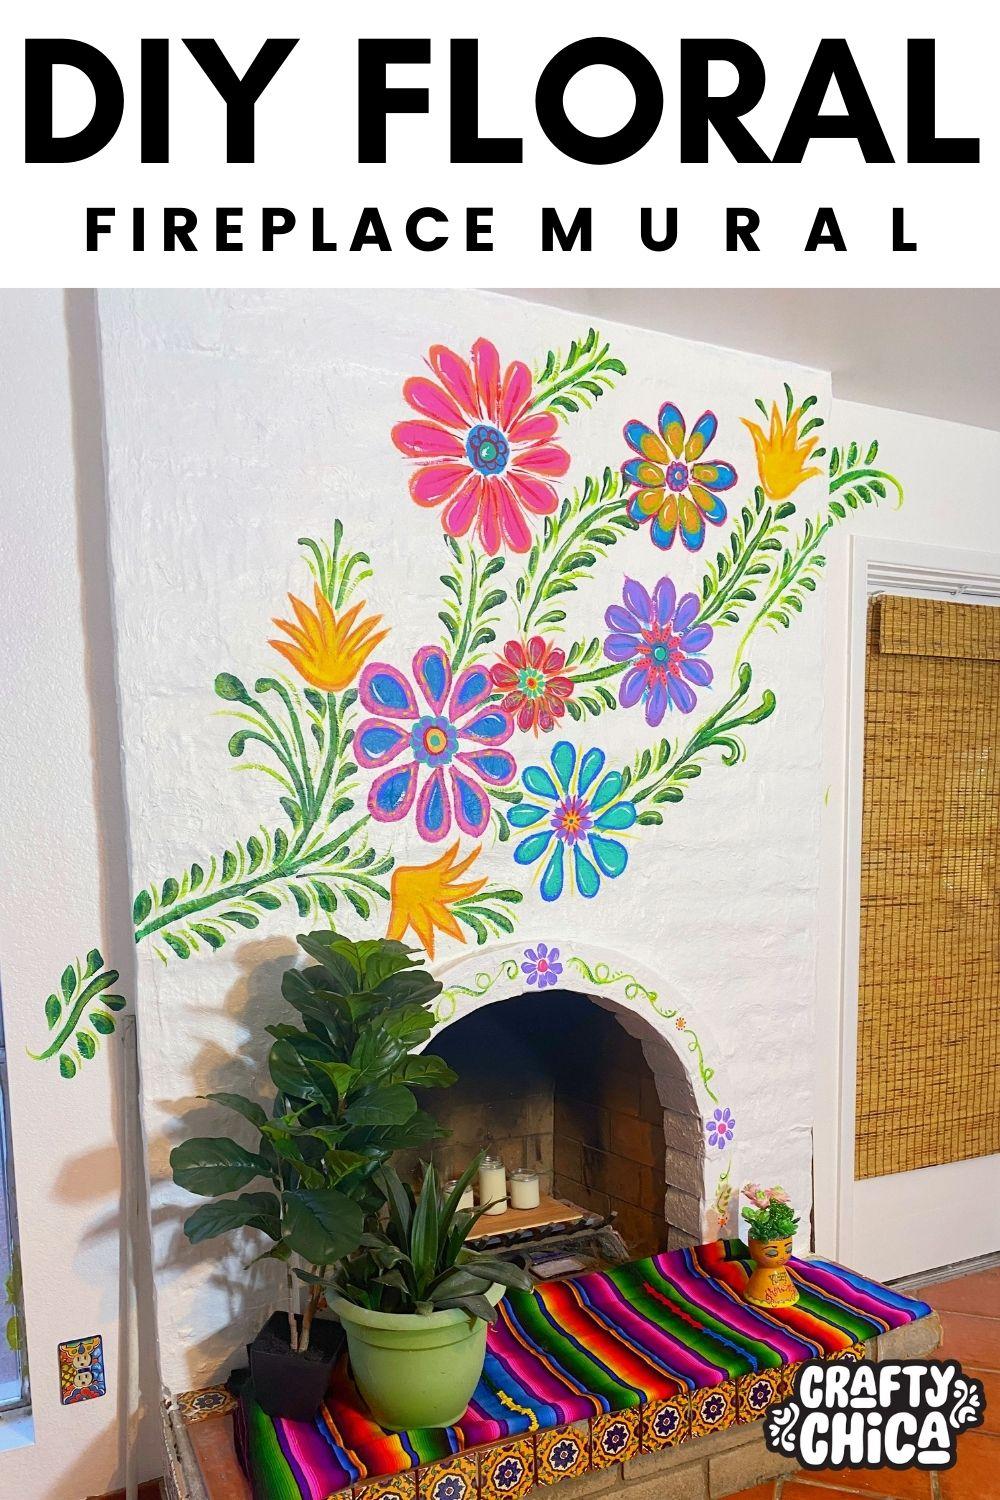 DIY Mexican-Embroidery Mural by Kathy Cano-Murillo, The Crafty Chica.